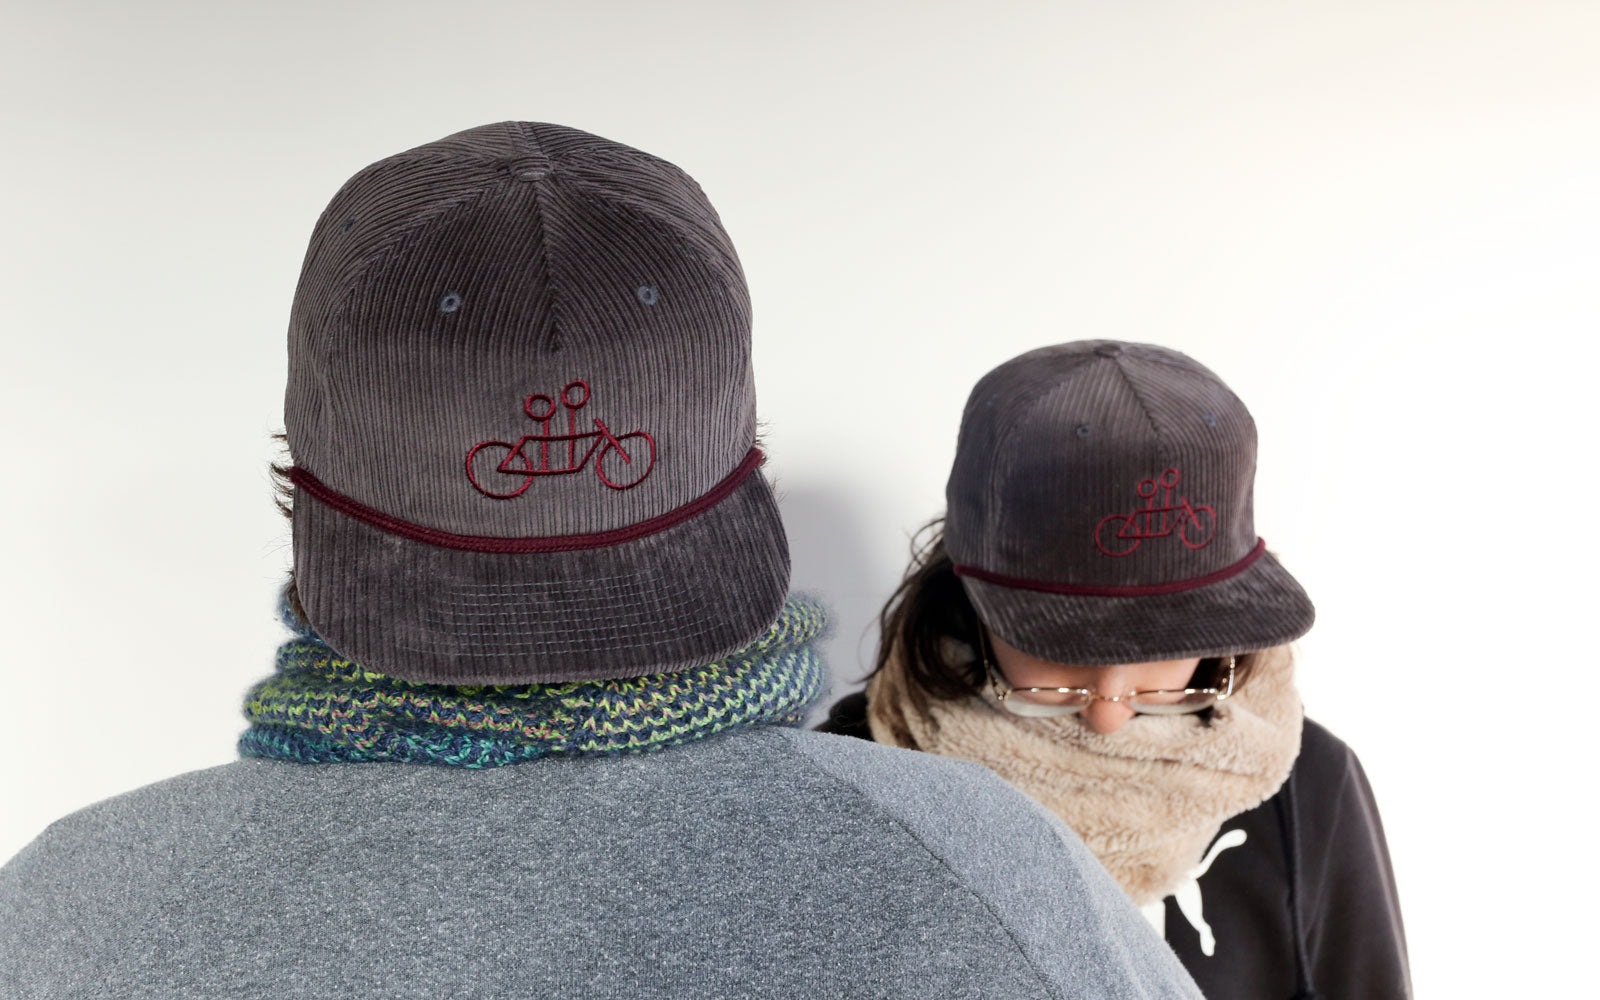 Two people from behind, wearing dark hats embroidered with a red bicycle logo. one person, likely female, wears glasses and a scarf, while the other, likely male, sports a knitted multicolored scarf.